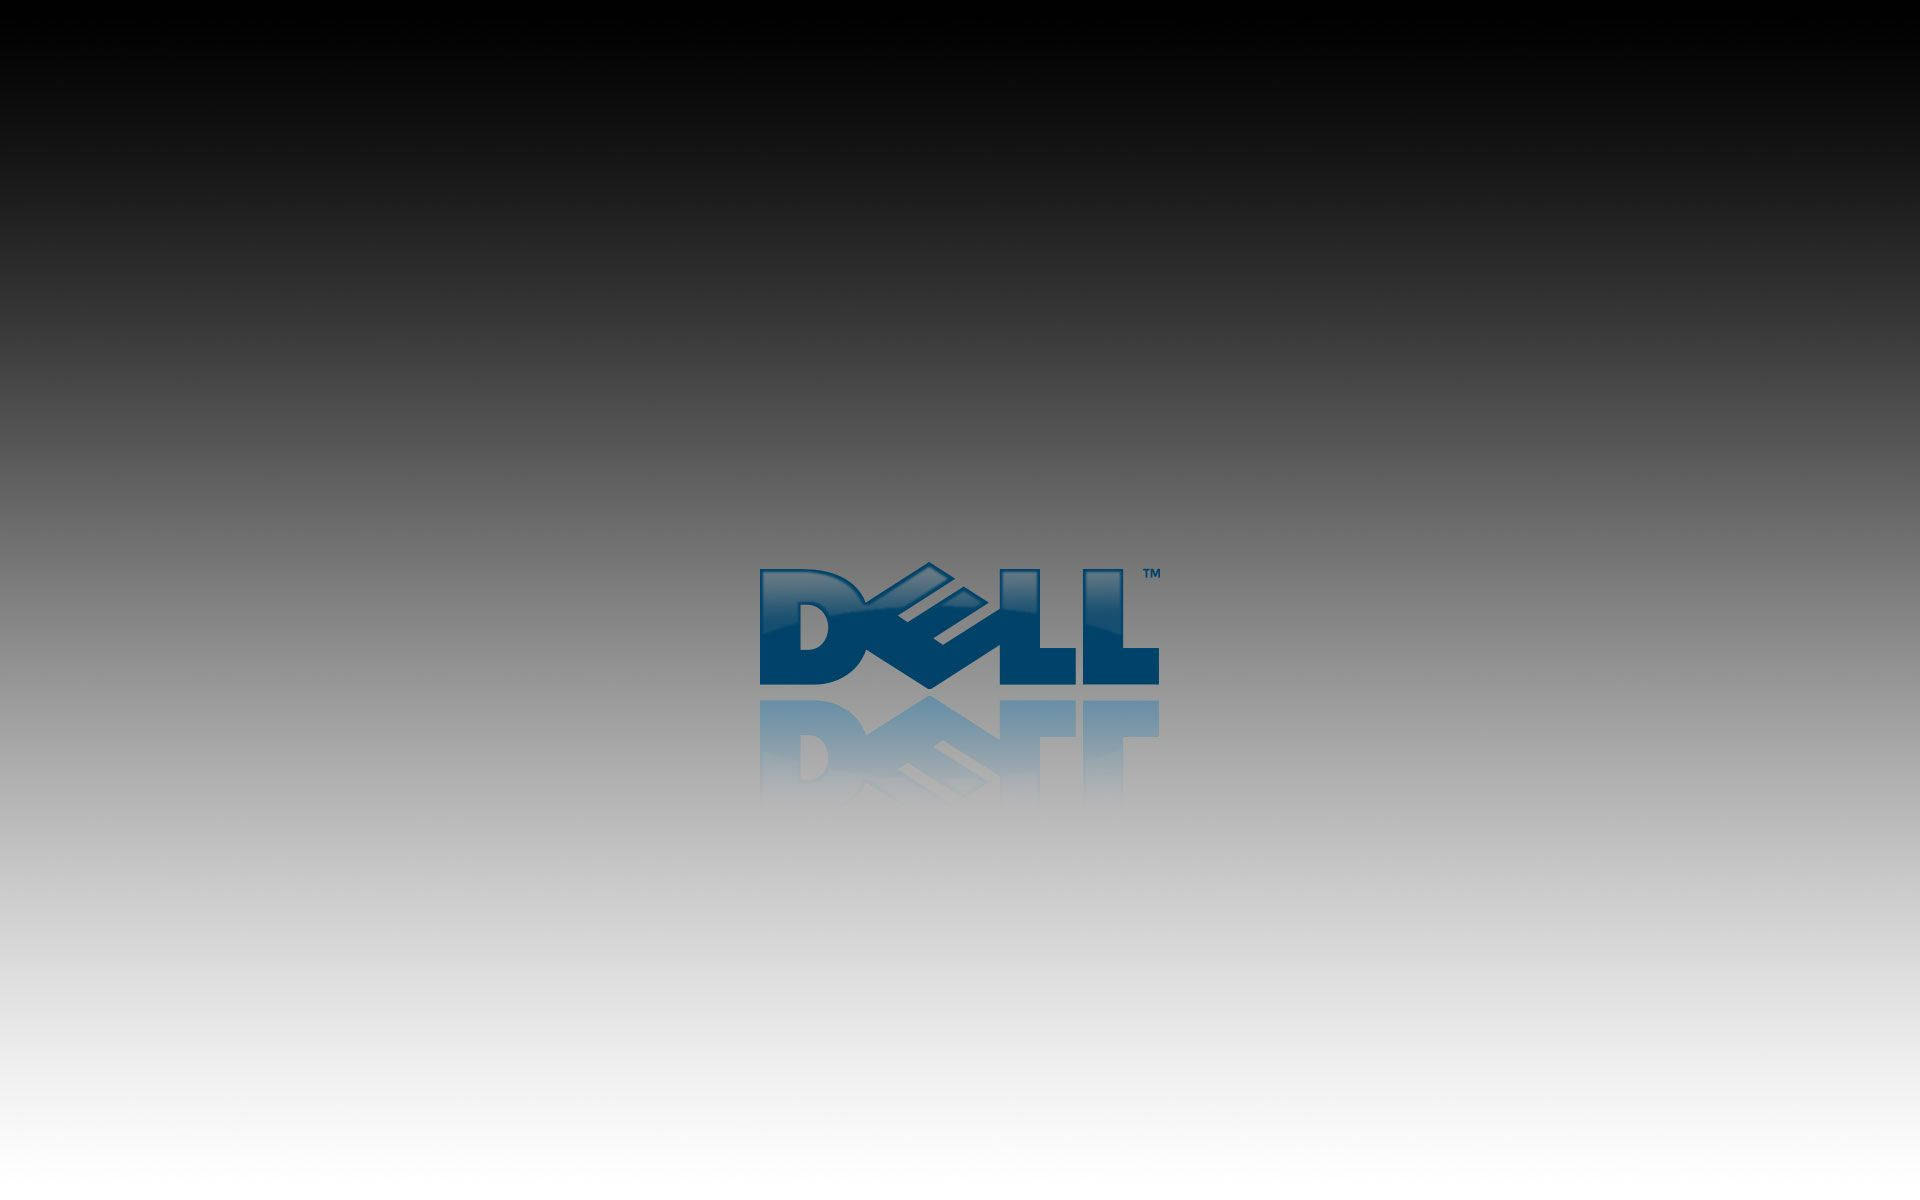 Solid Blue Dell Hd Logo Background